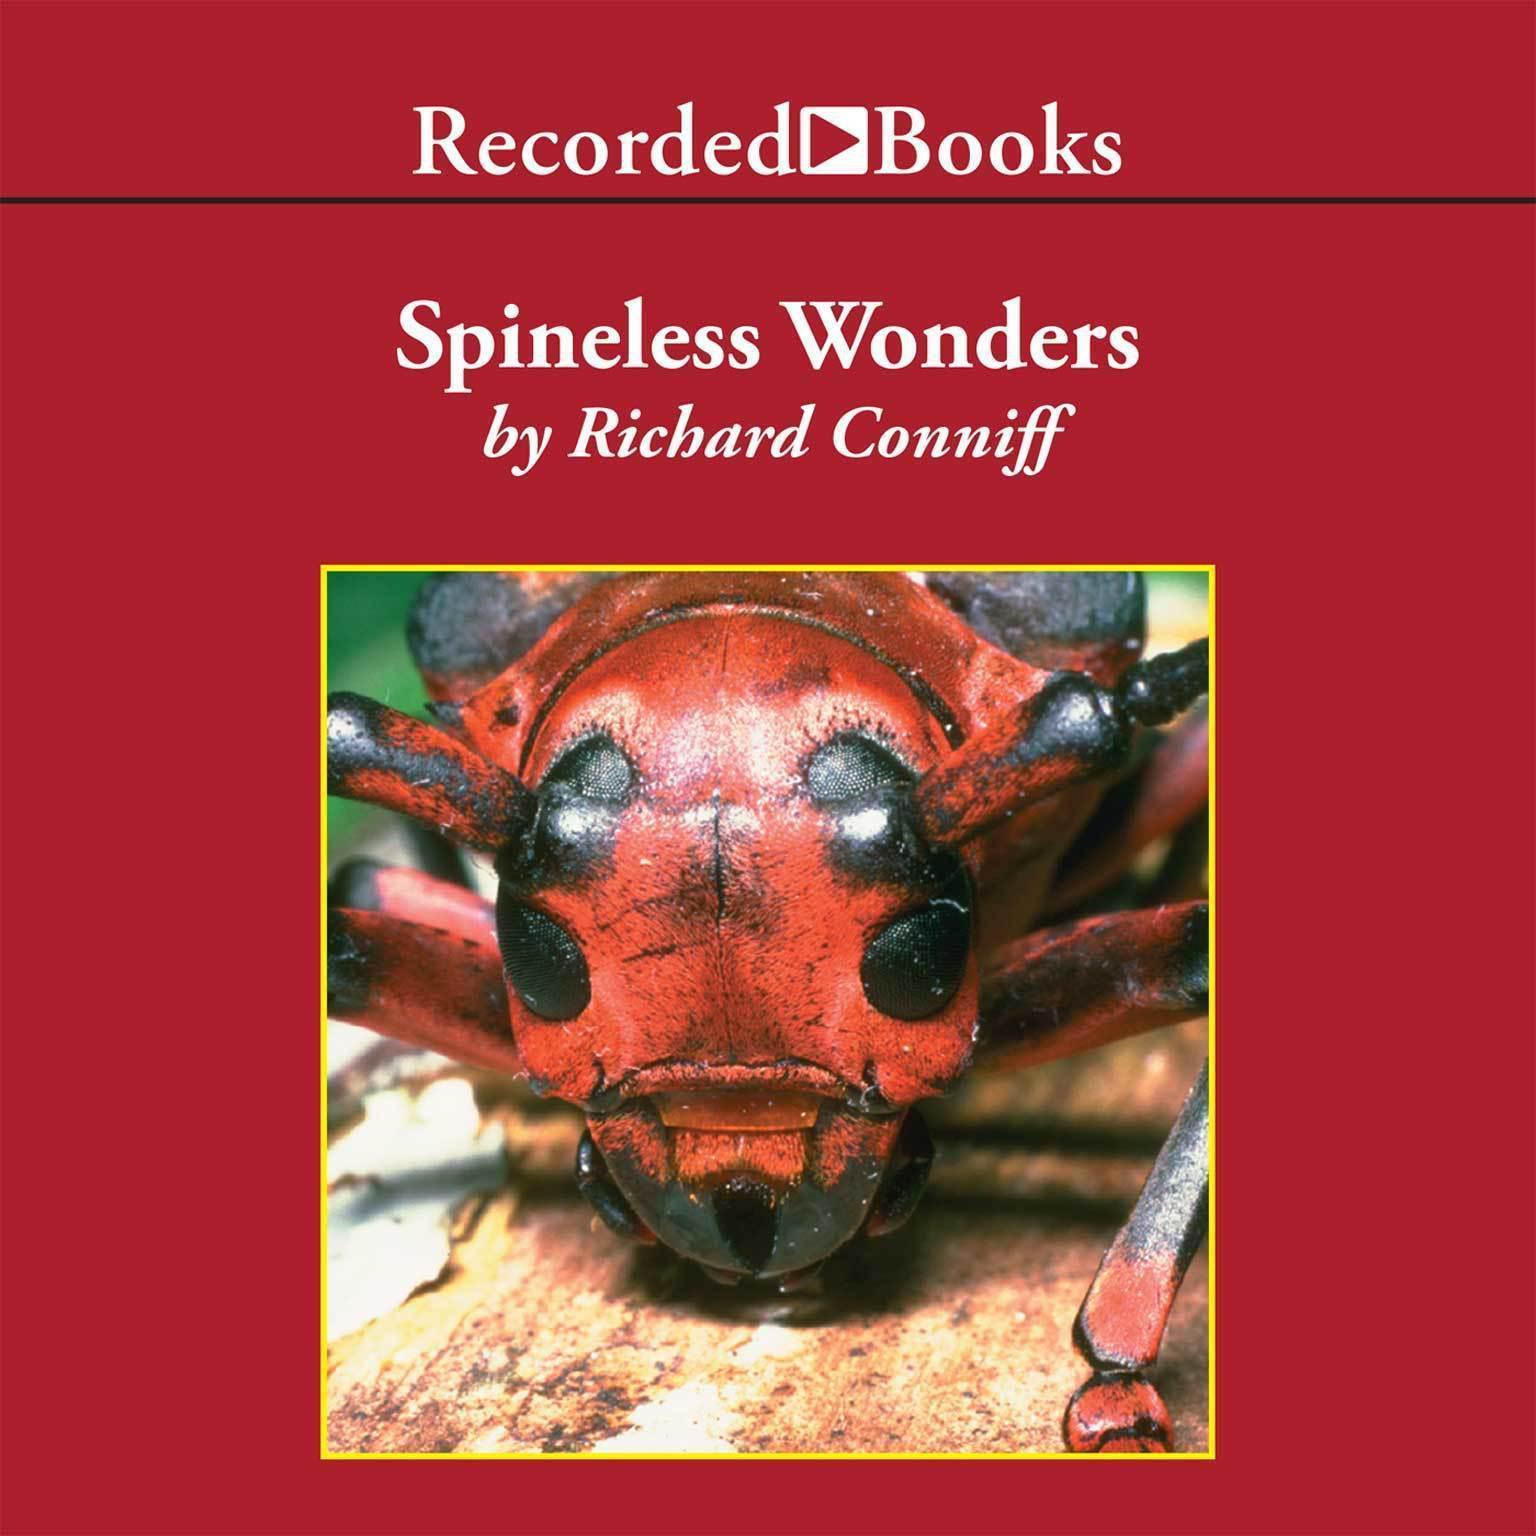 Spineless Wonders: Strange Tales from the Invertebrate World Audiobook, by Richard Conniff